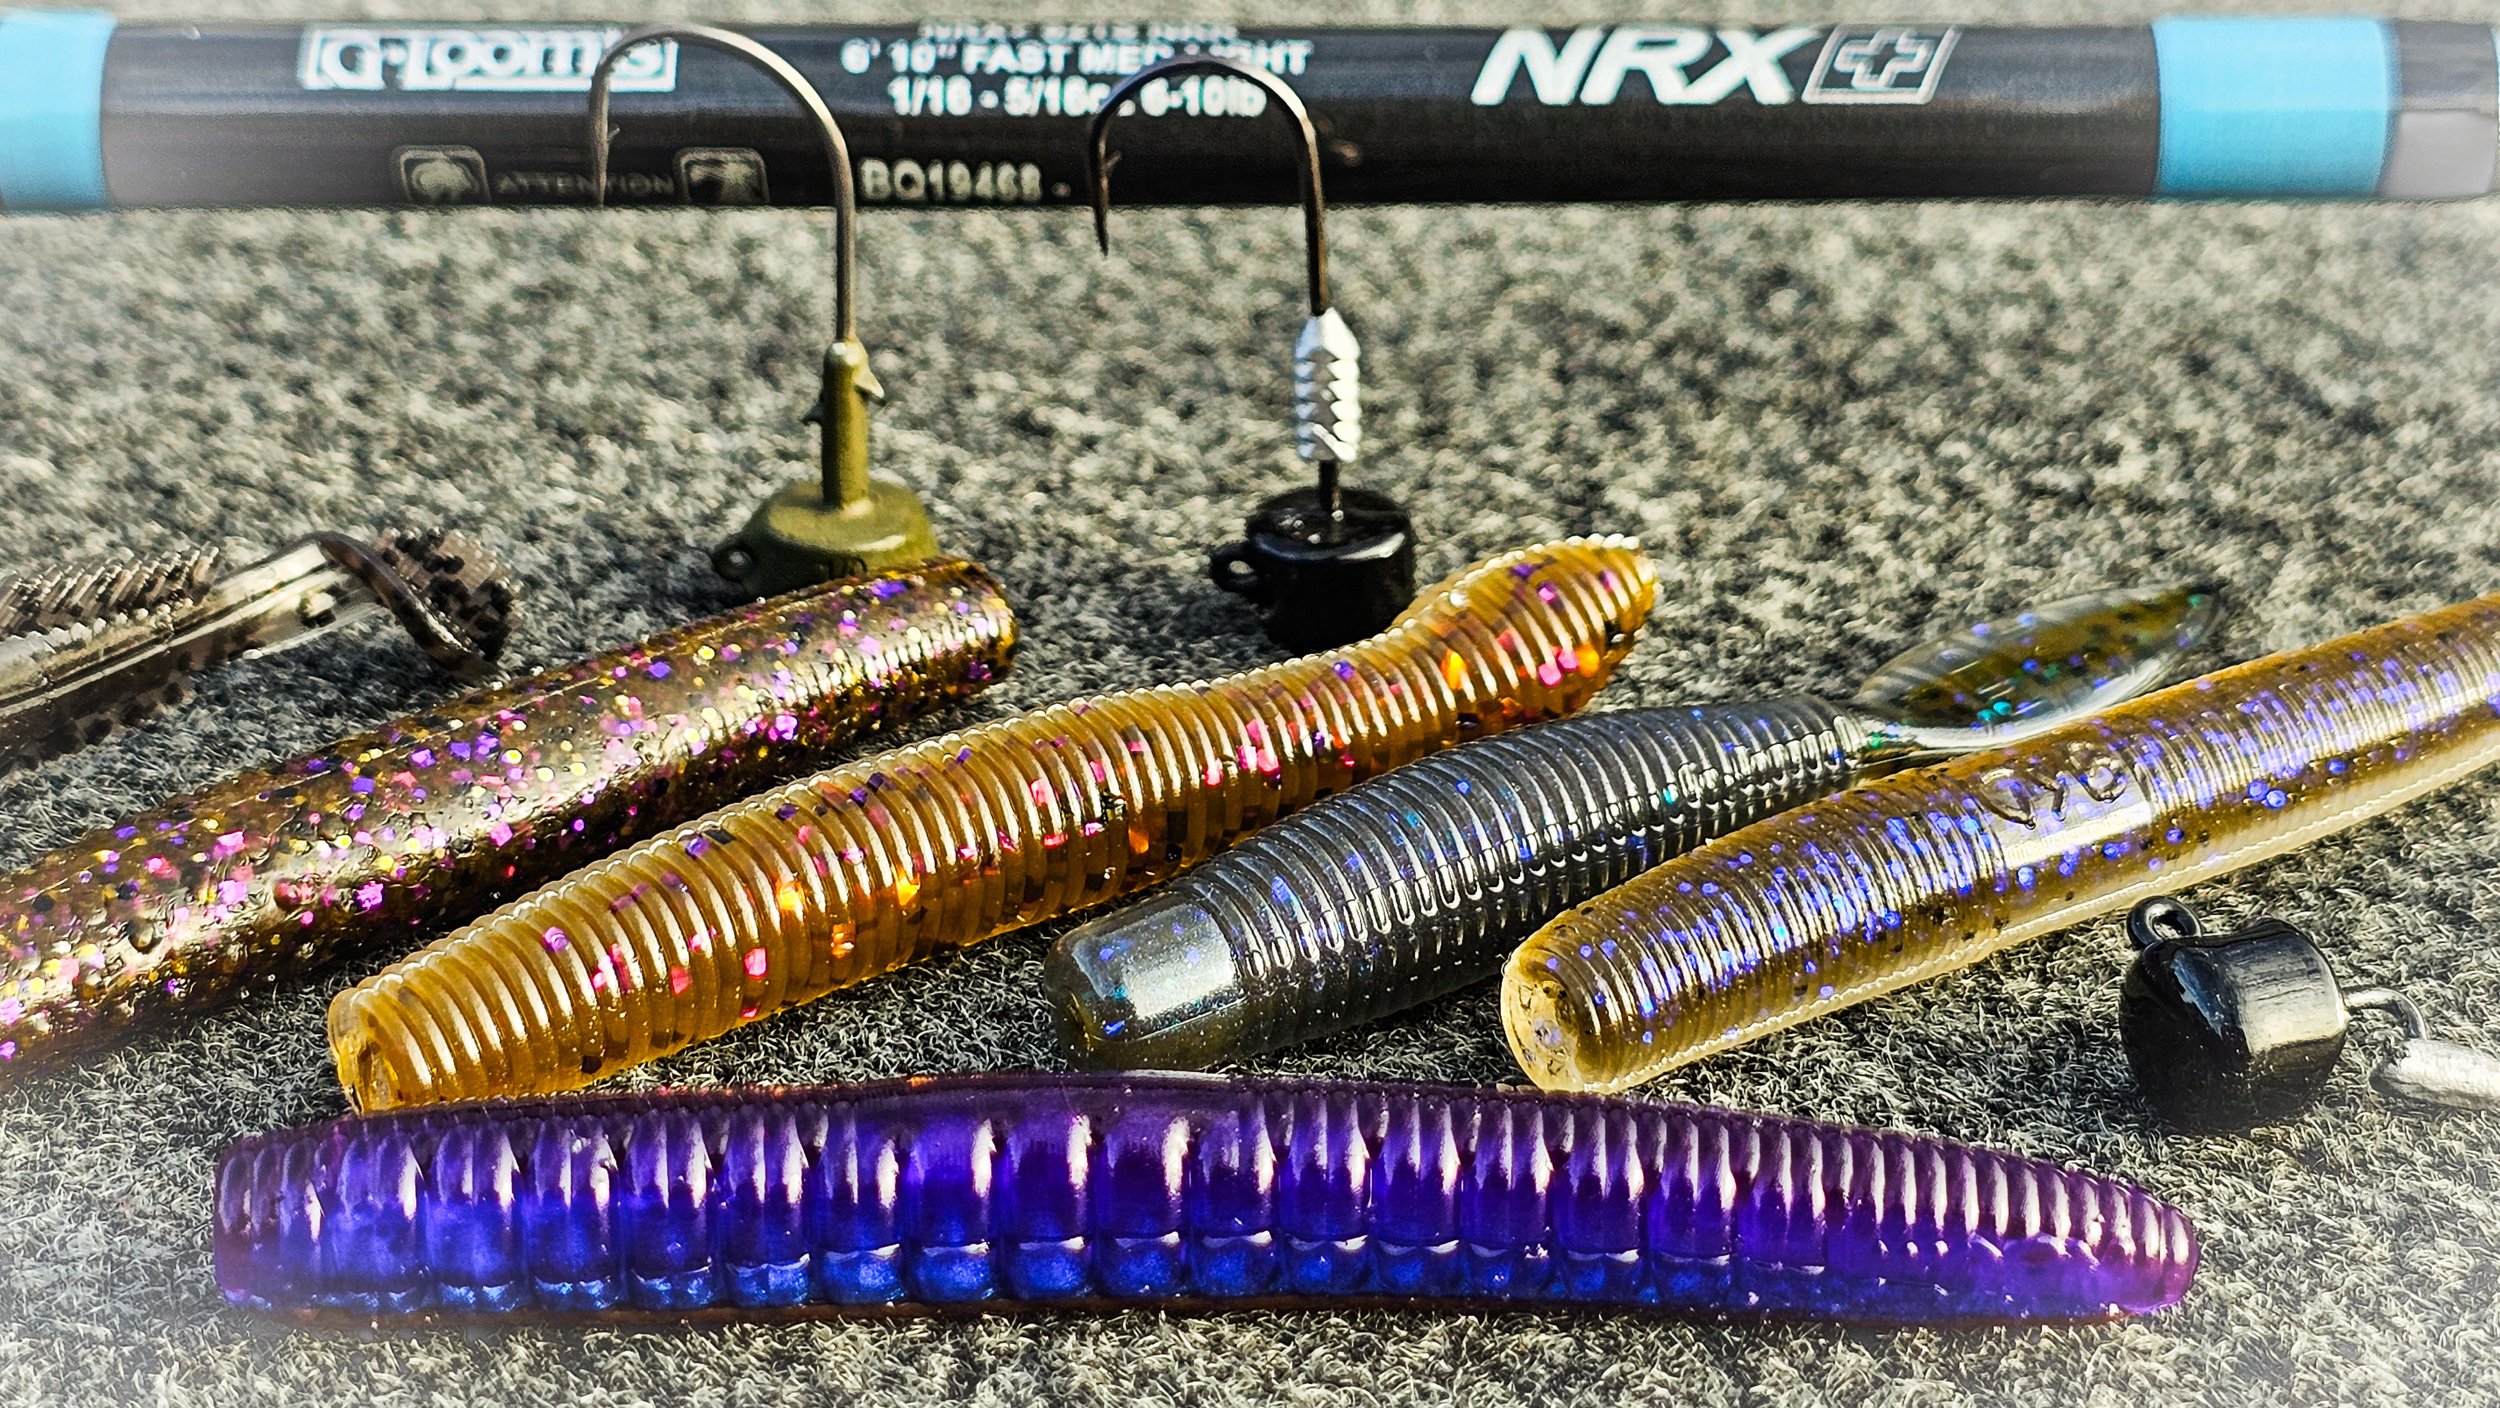 Whats New with Alabama Rigs? — Tactical Bassin' - Bass Fishing Blog